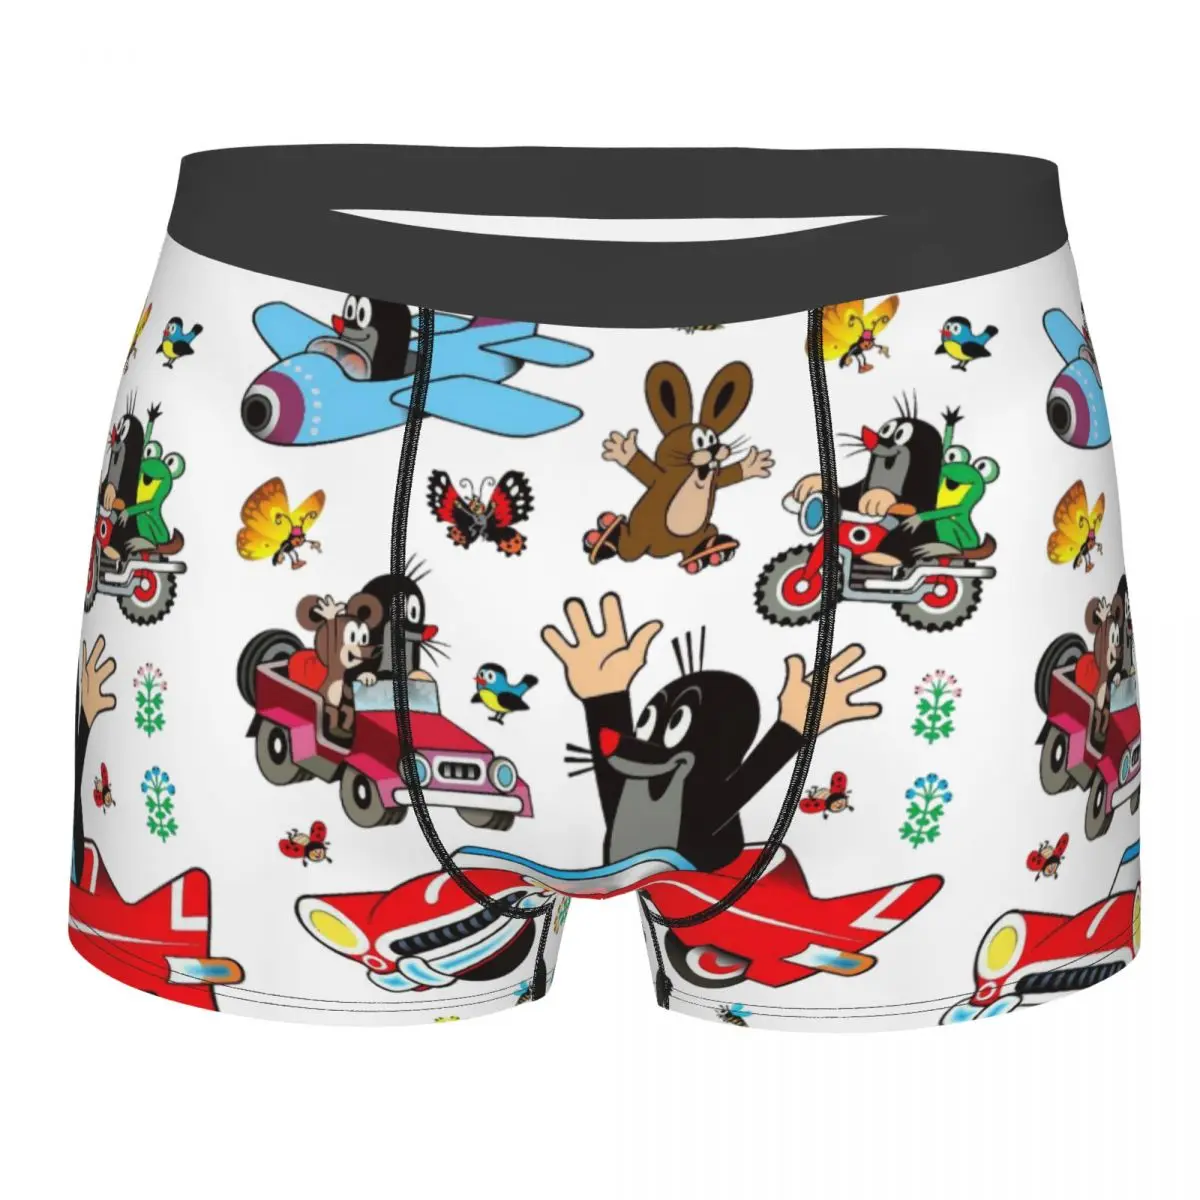 Krtek Little Maulwurf Mencosy Boxer Briefs,3D printing Underwear, Highly Breathable Top Quality Gift Idea